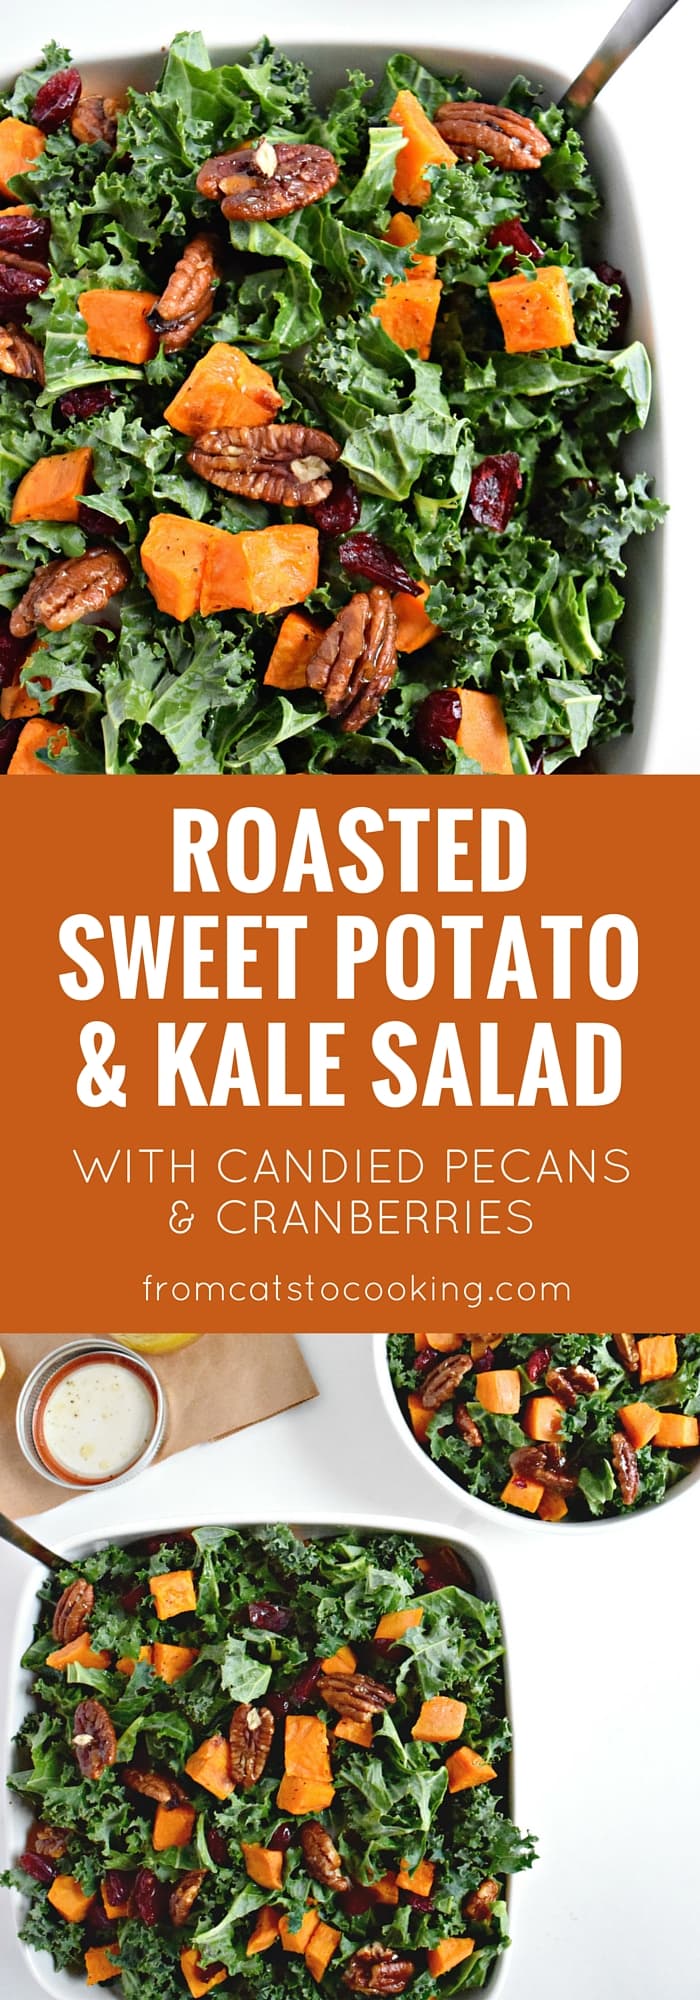 Topped with an easy homemade honey lemon vinaigrette, this roasted sweet potato and kale salad with candied pecans and cranberries is perfect for the holiday season. - isabeleats.com